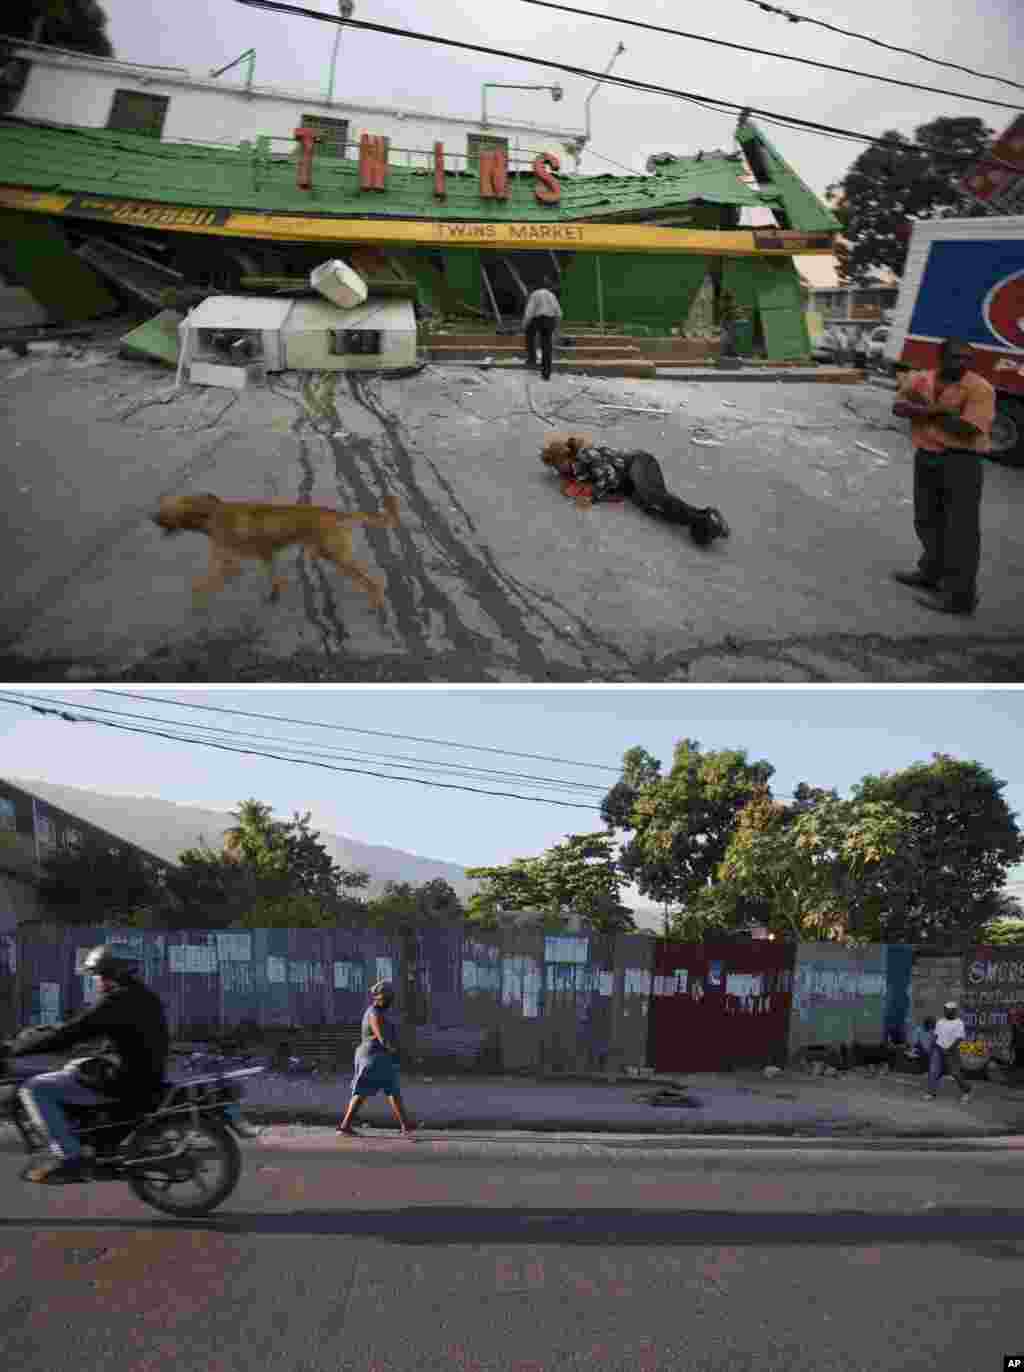 FILE - At top, Jan. 12, 2010, the Twins Market the day it collapsed during a 7.0 earthquake that struck Port-au-Prince, Haiti; below, Jan. 10, 2015, only a metal fence stands. 